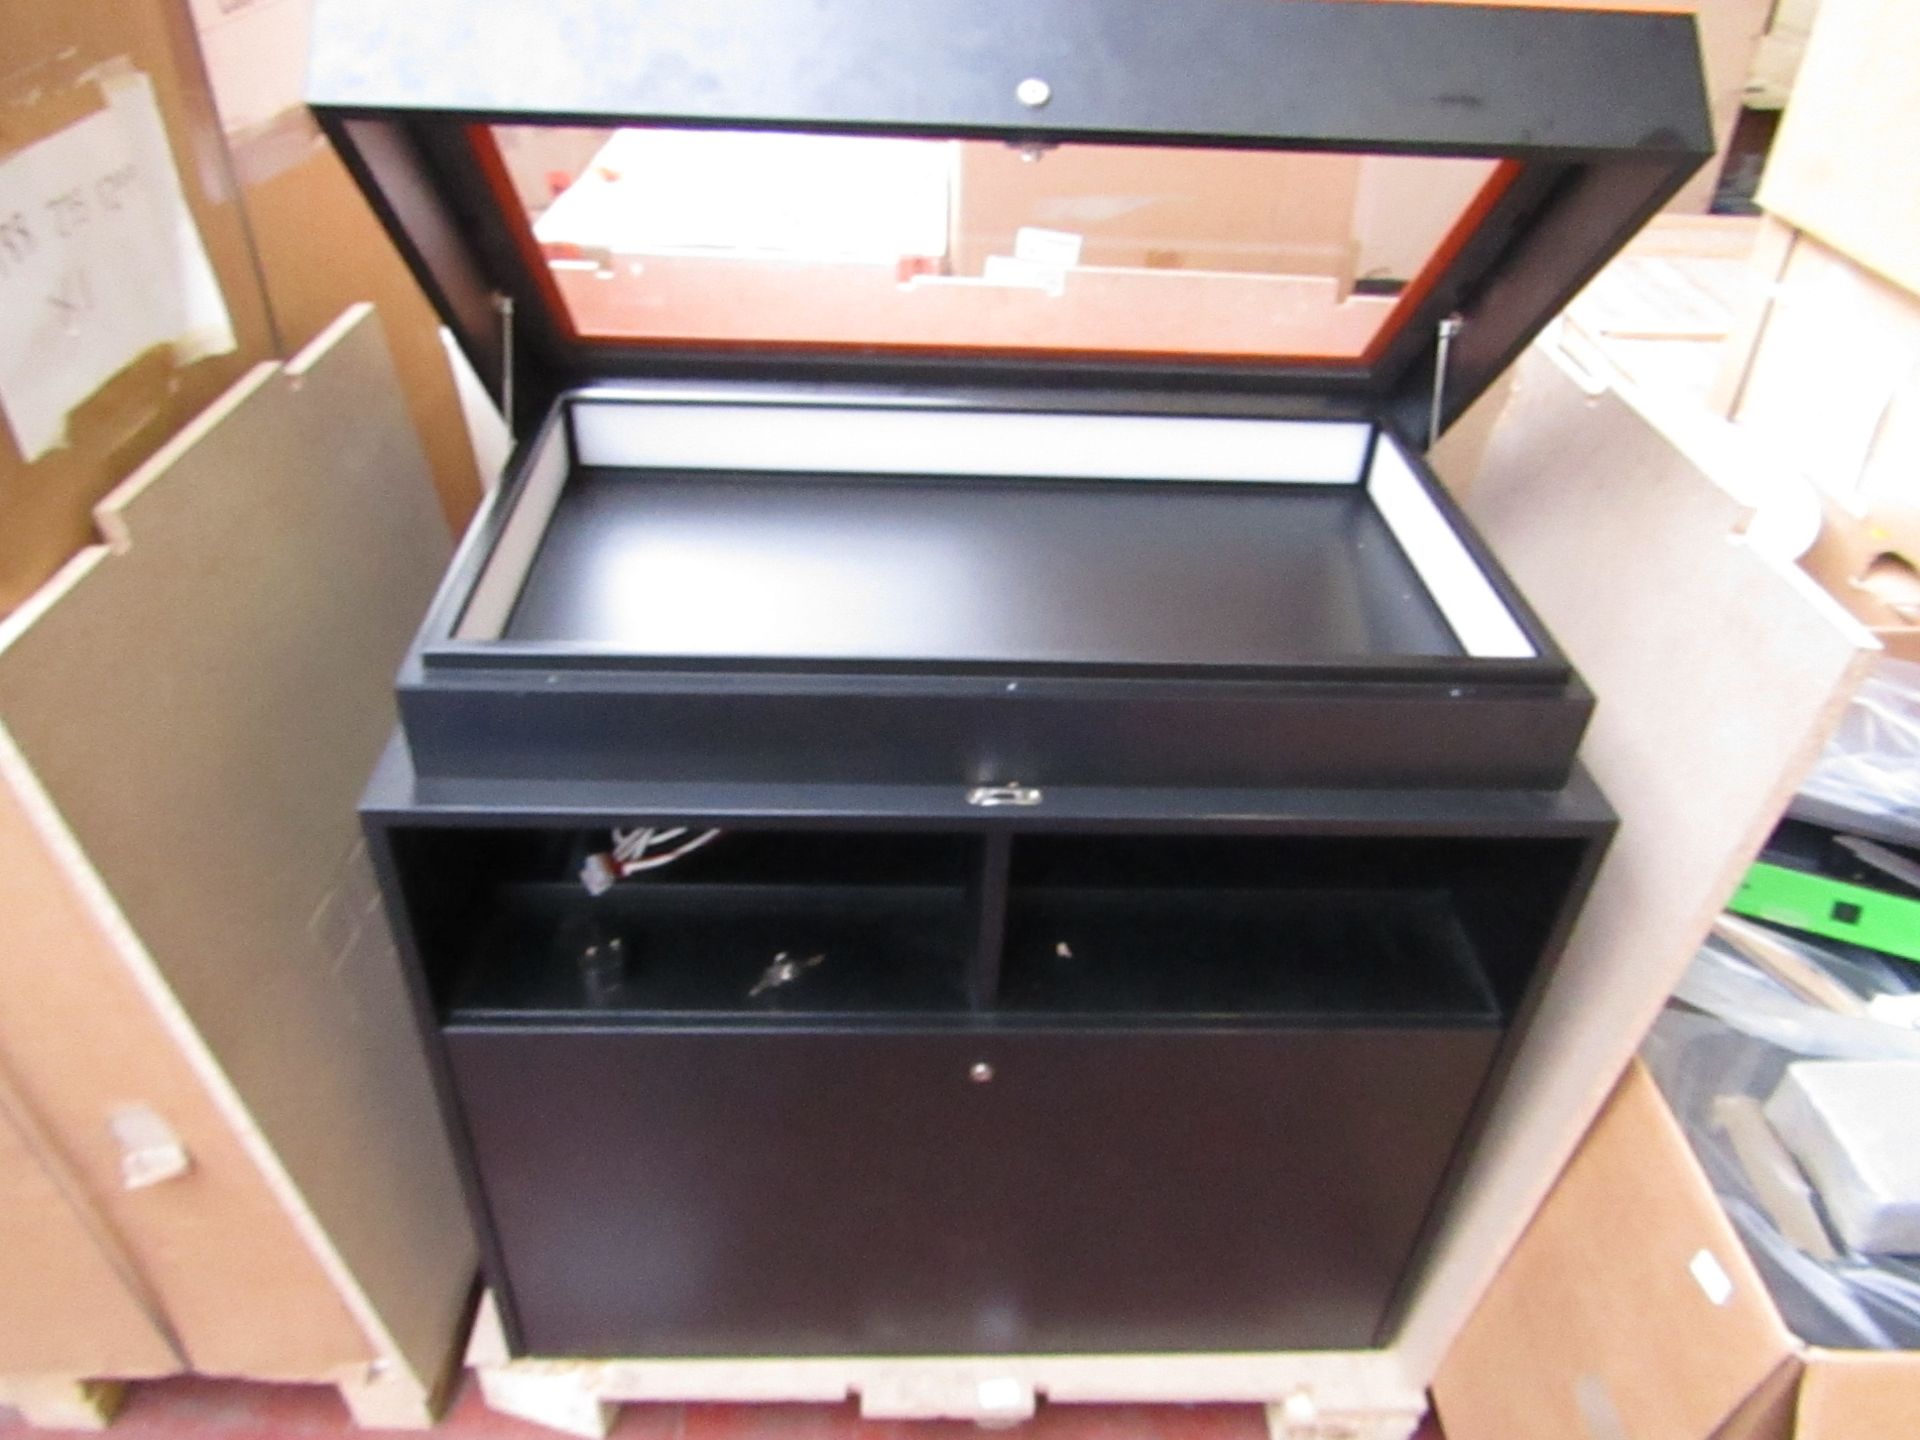 Promotions desk with showcase top with light module built in (working), few scuff marks and left